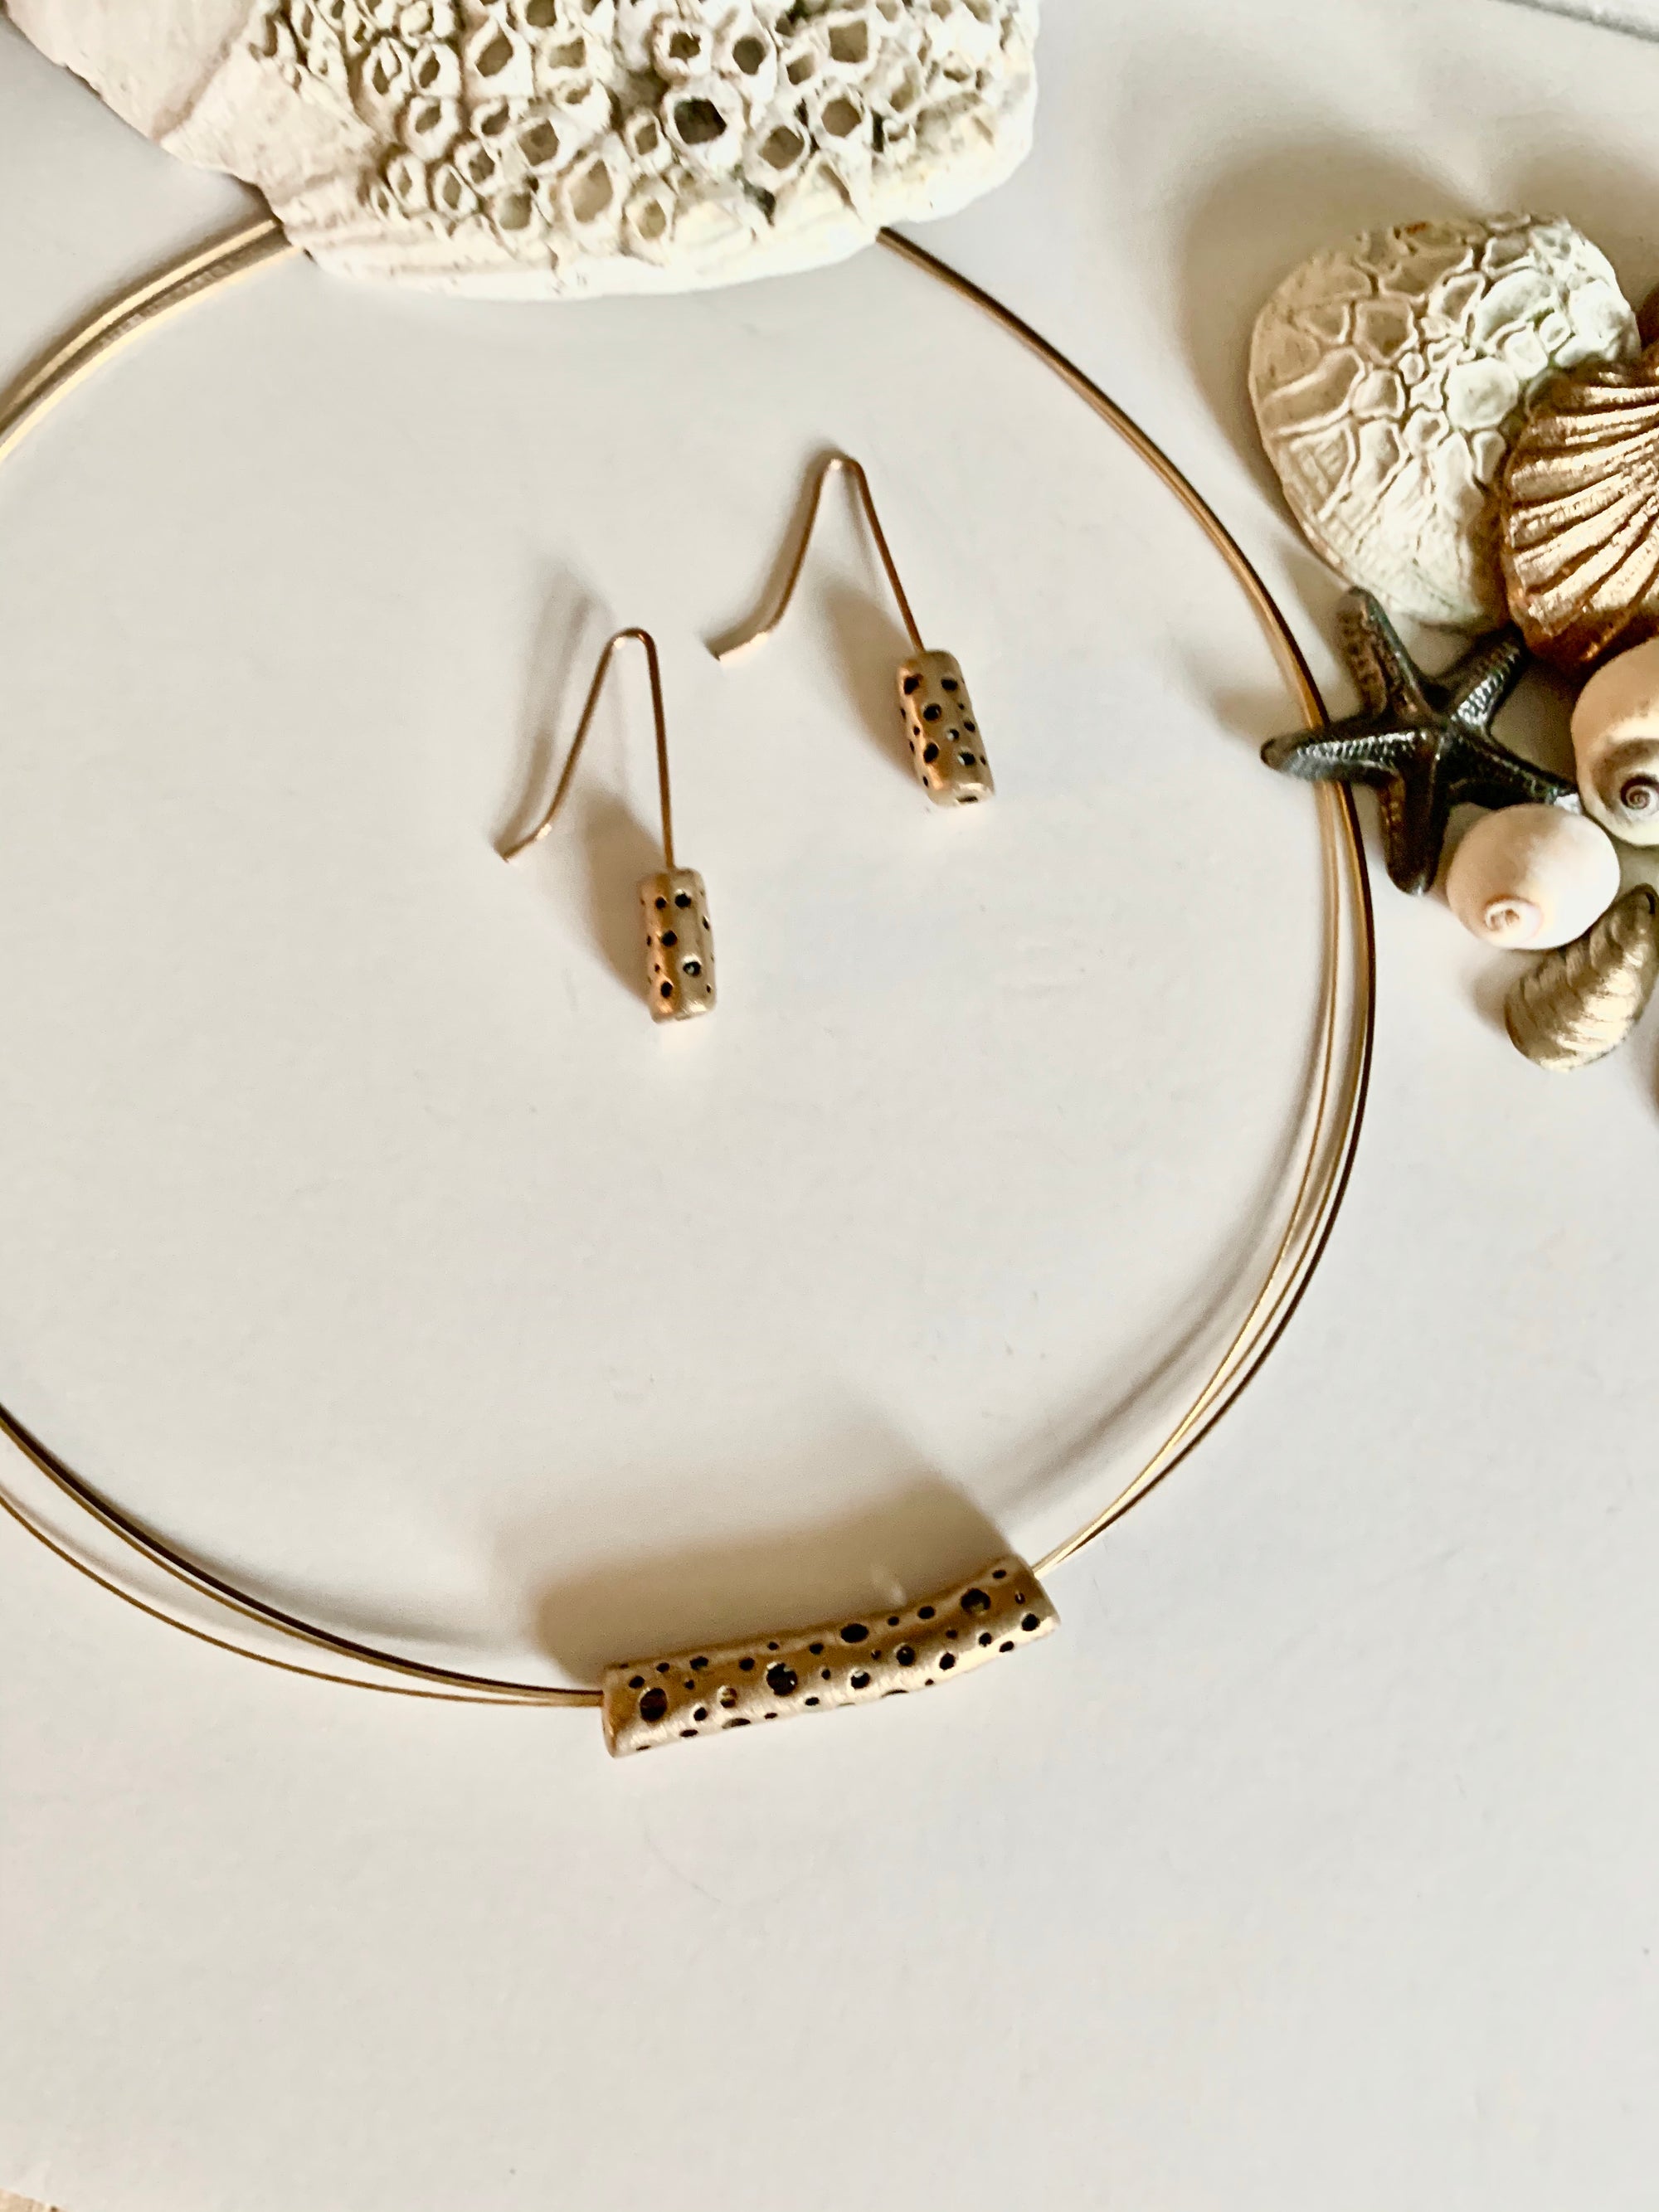 Perfect pairings:  Skye earrings and Caprice necklace